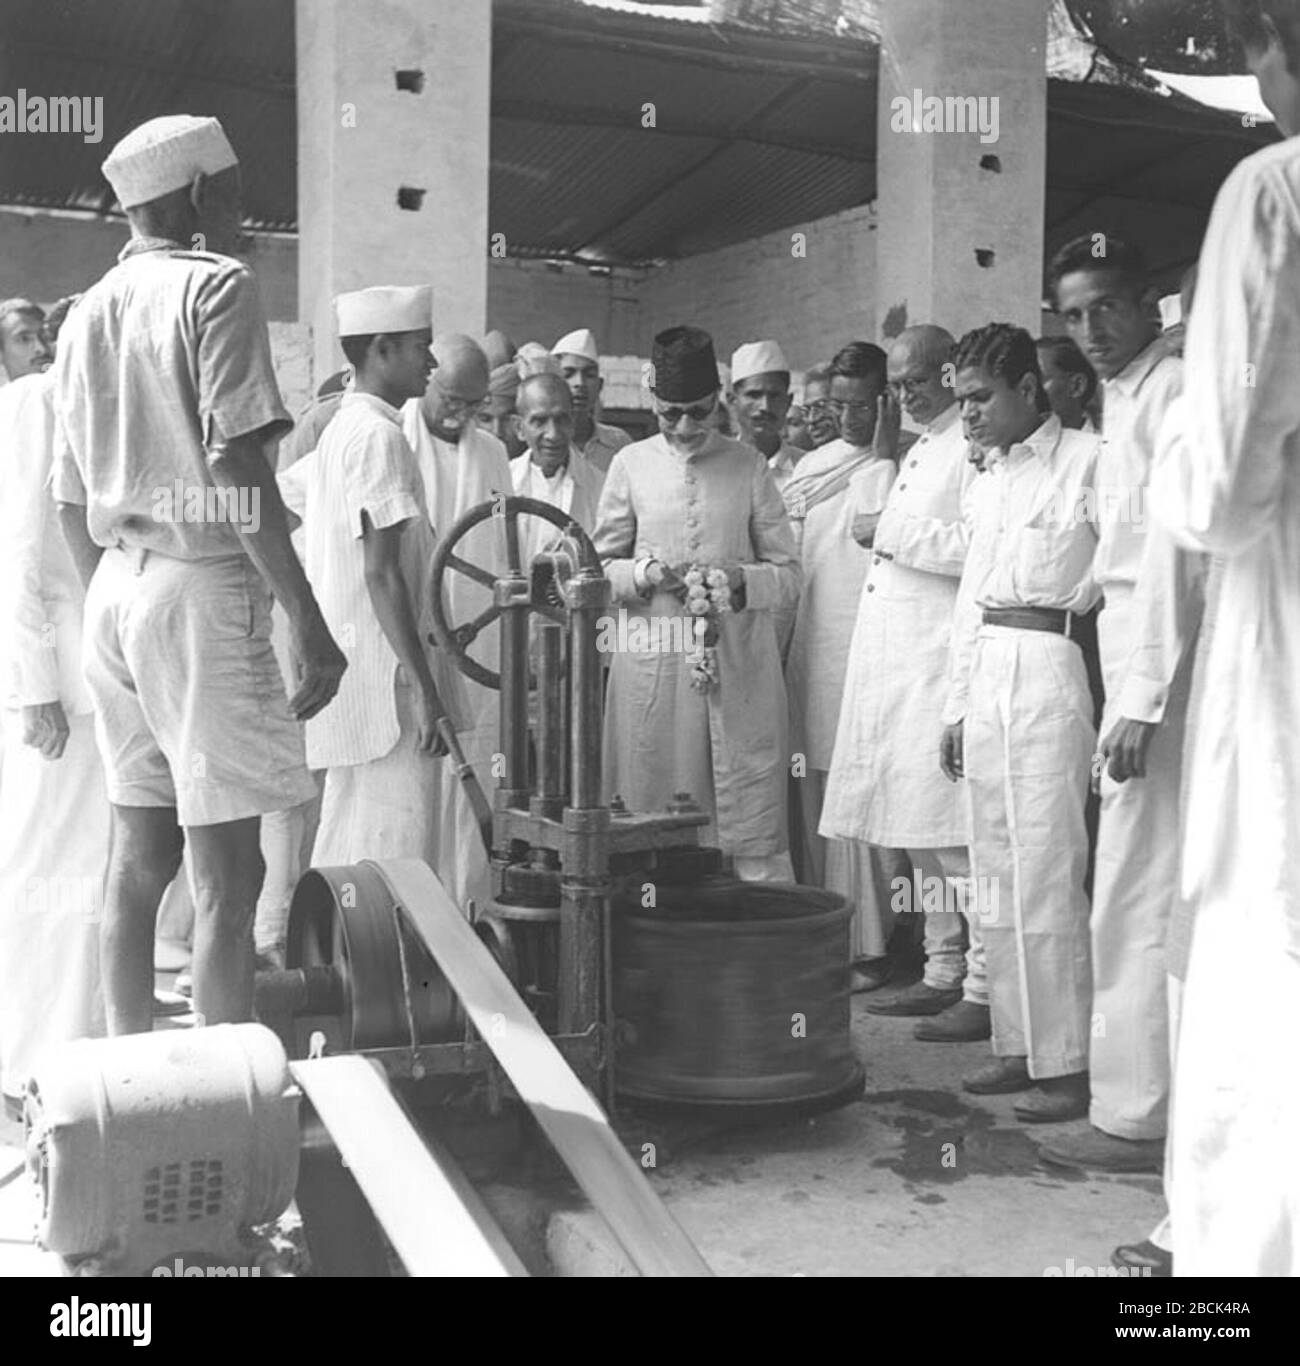 'English: Visit of the Hon'ble Maulana Abdul Kalam Azad to the Vignam kala Bhavan, Baurala on 4.4. 48.; 4 April 1948; http://photodivision.gov.in/IntroPhotodetails.asp?thisPage=1502; Photo Division, Ministry of Information & Broadcasting, Government of India; ' Stock Photo